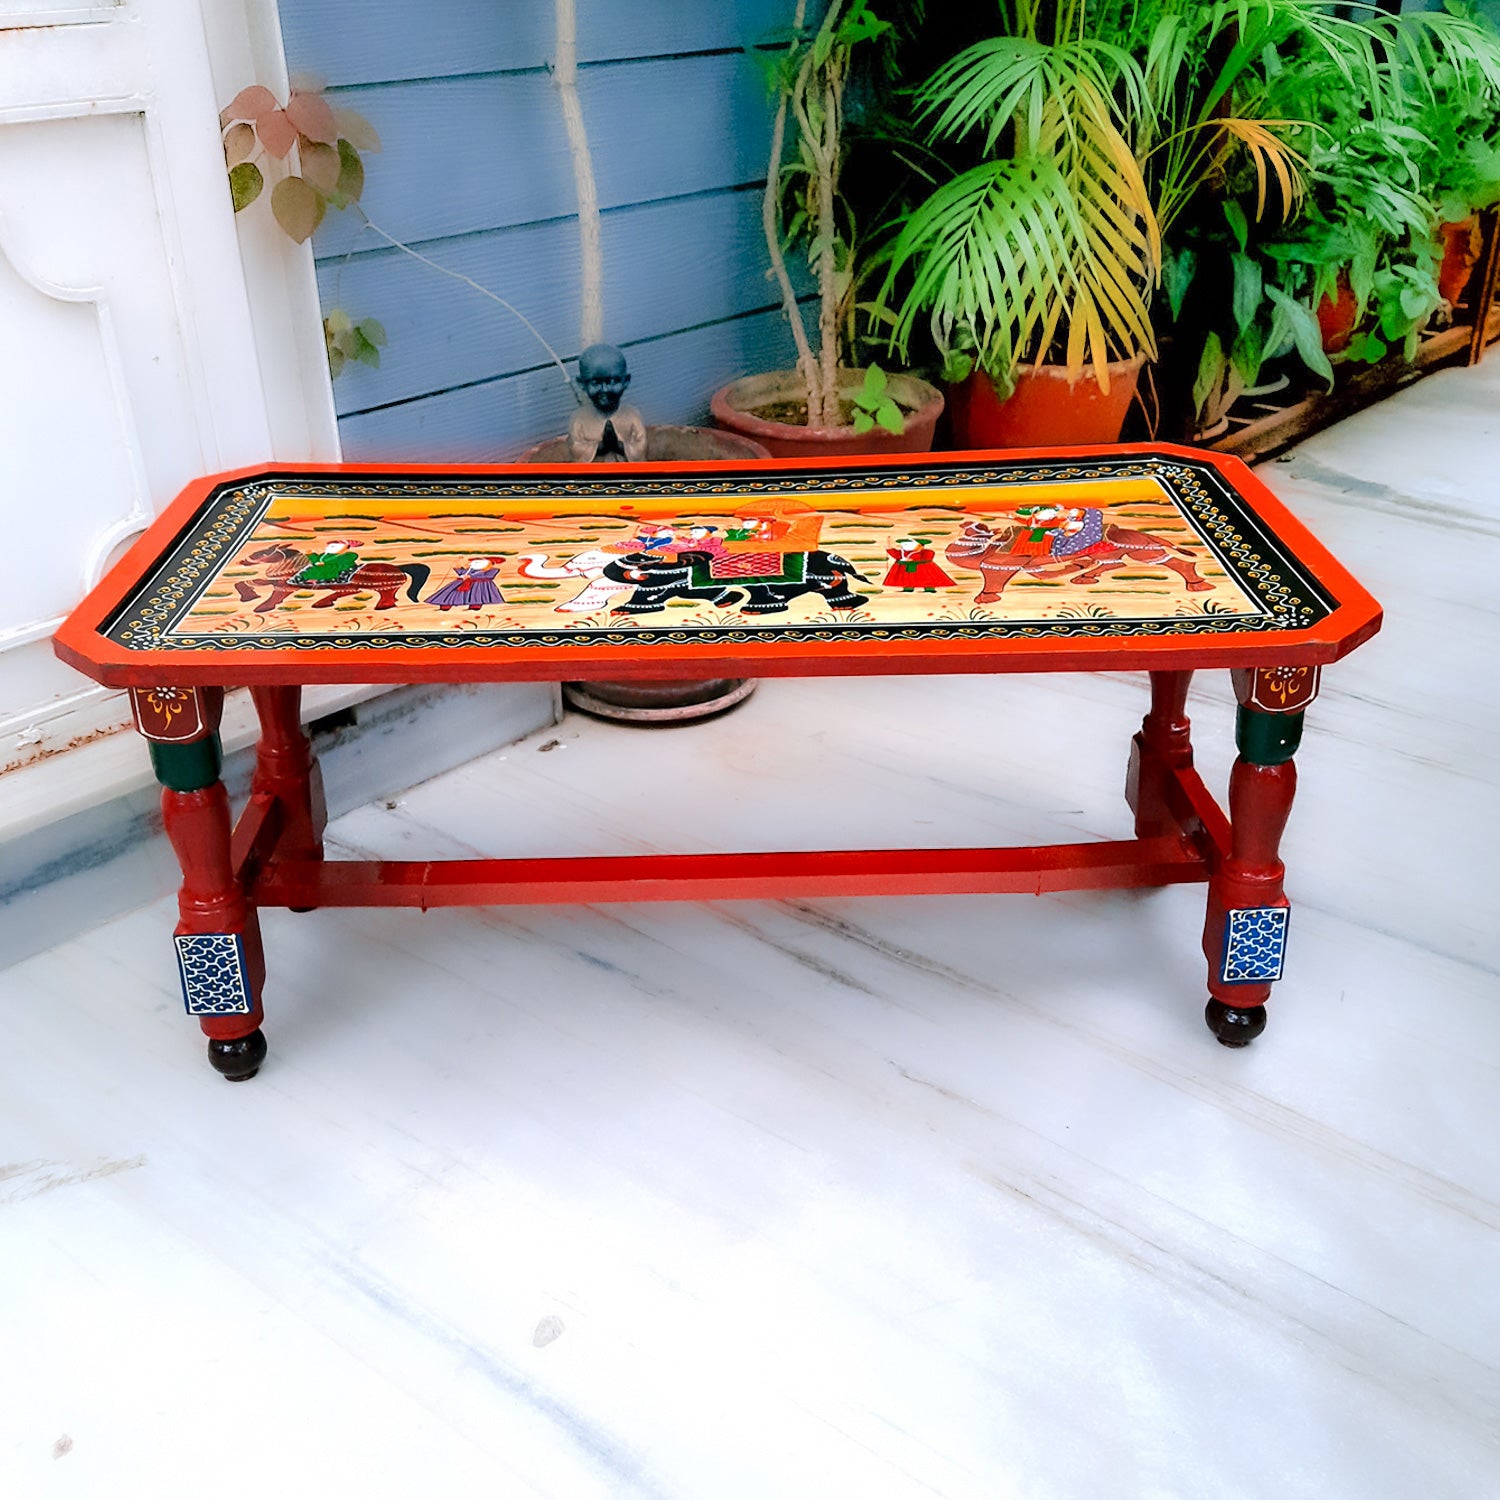 Coffee Tables for Living Room |Table for Home Decor & Gifts - 36 Inch- Apkamart #Color_Orange